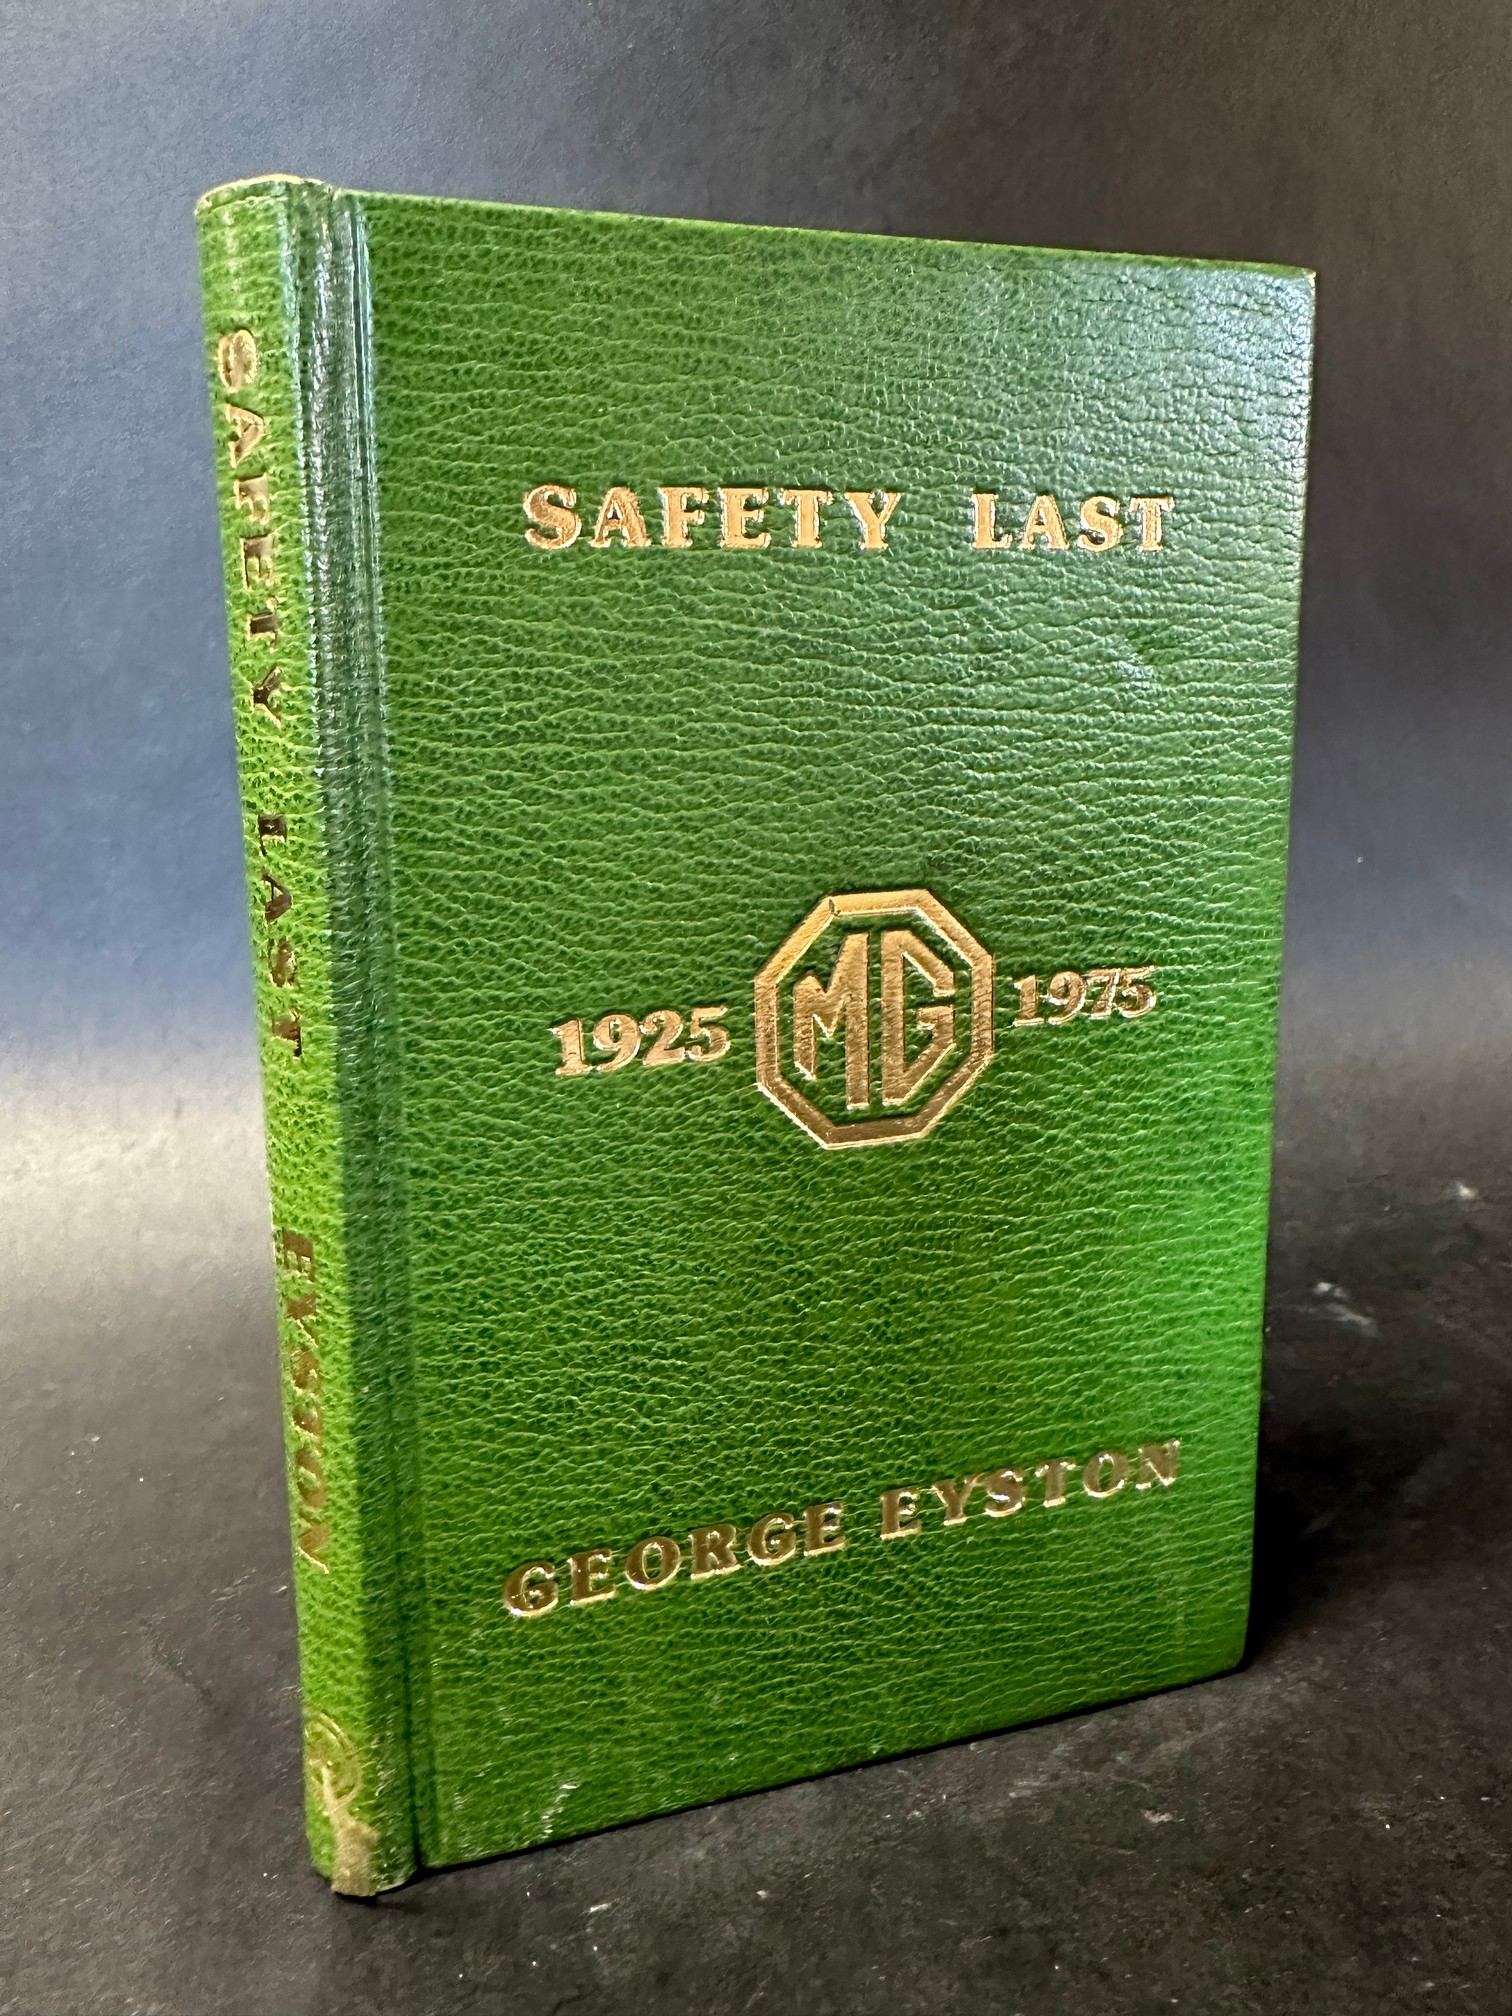 Safety Last' - George Eyston, 154/750, 1975, signed by the author, 160 pages.